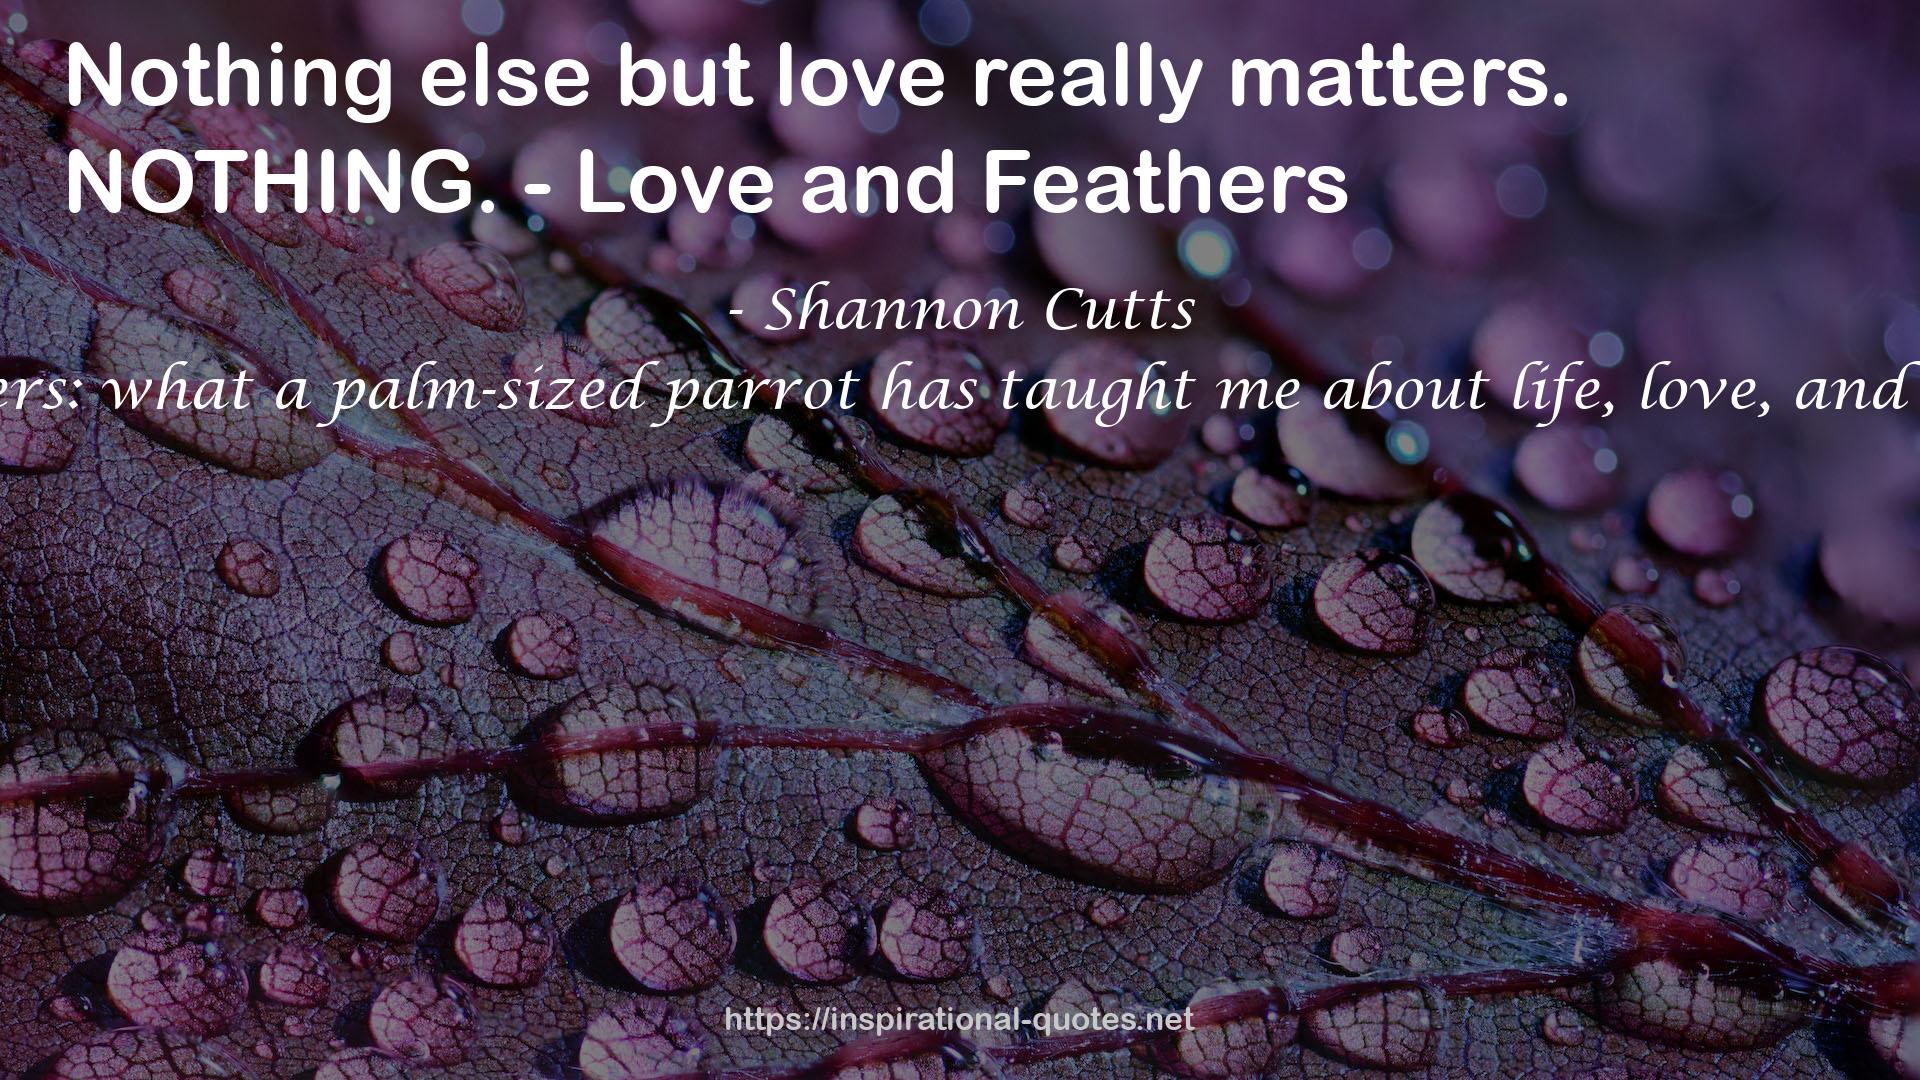 Love & Feathers: what a palm-sized parrot has taught me about life, love, and healthy self-esteem QUOTES